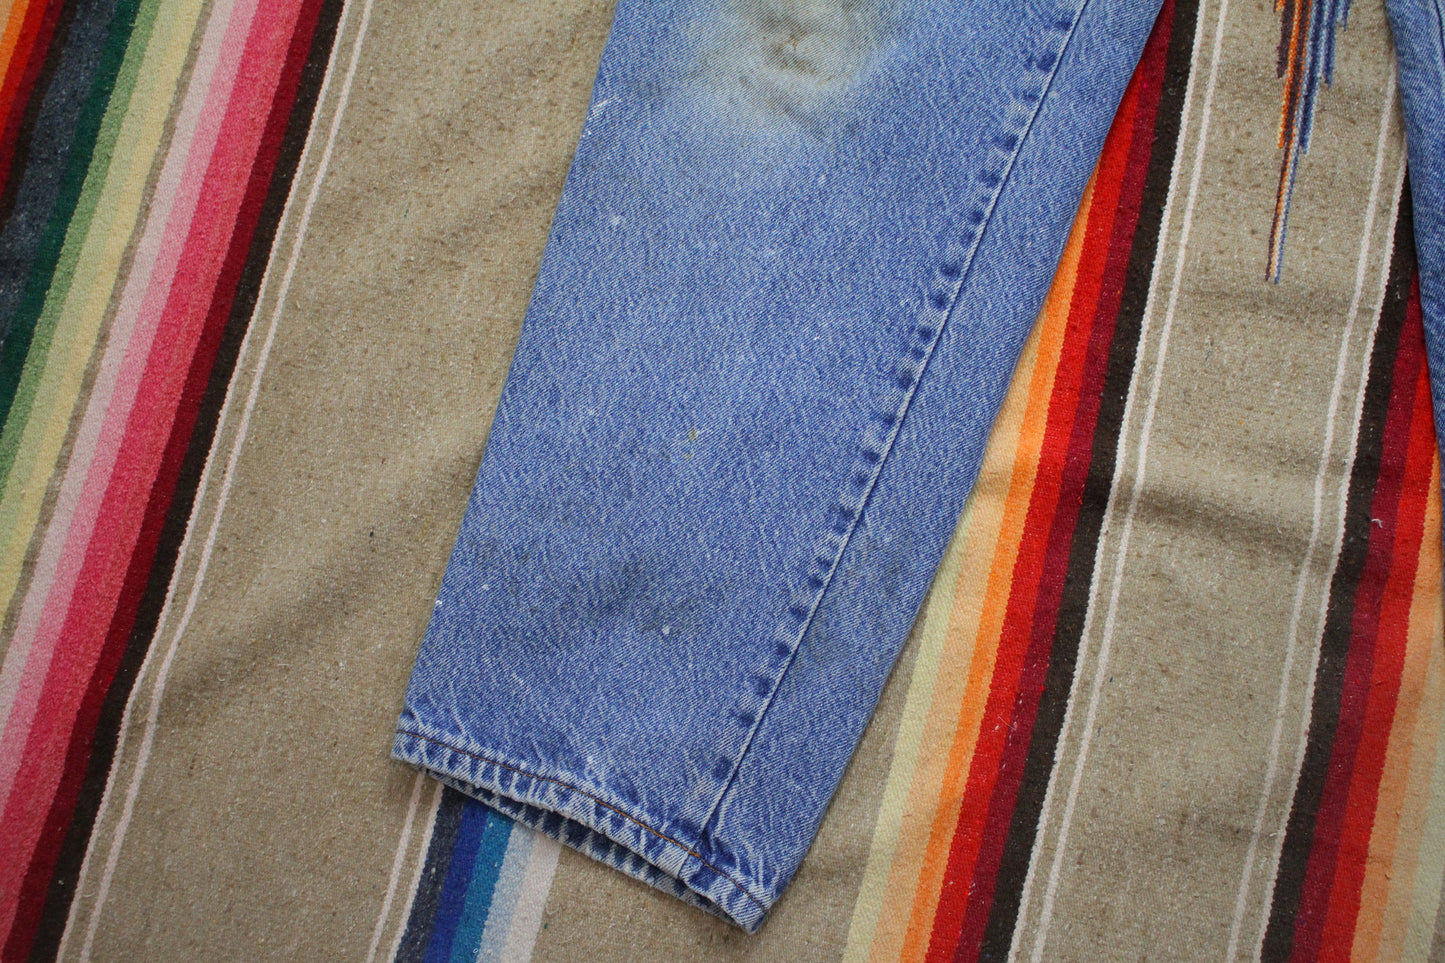 1990s H.I.S. Repaired Painter Blue Jeans Made in USA Size 36x32